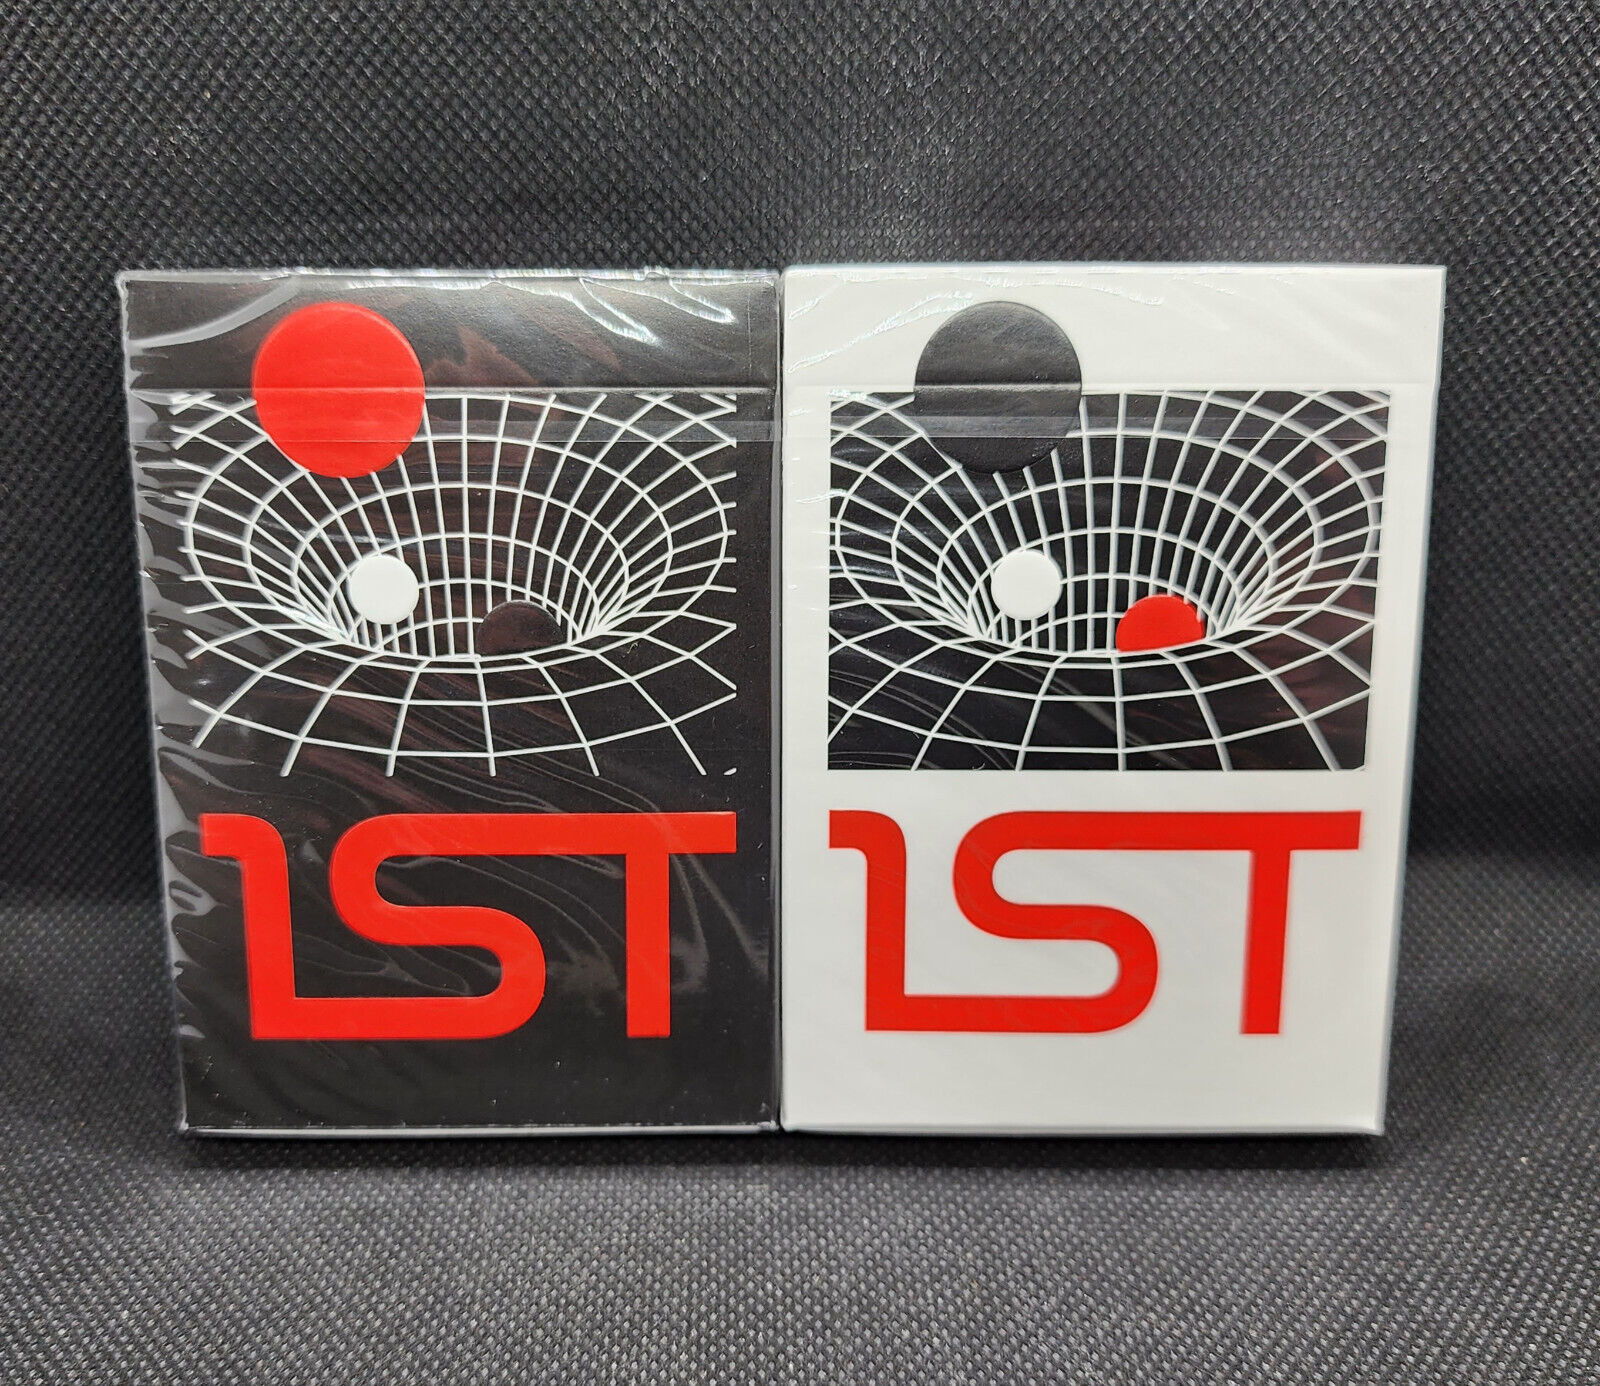 Set of 2 - New - Chris Ramsay Playing Cards - 1st - V4 - Red & Black